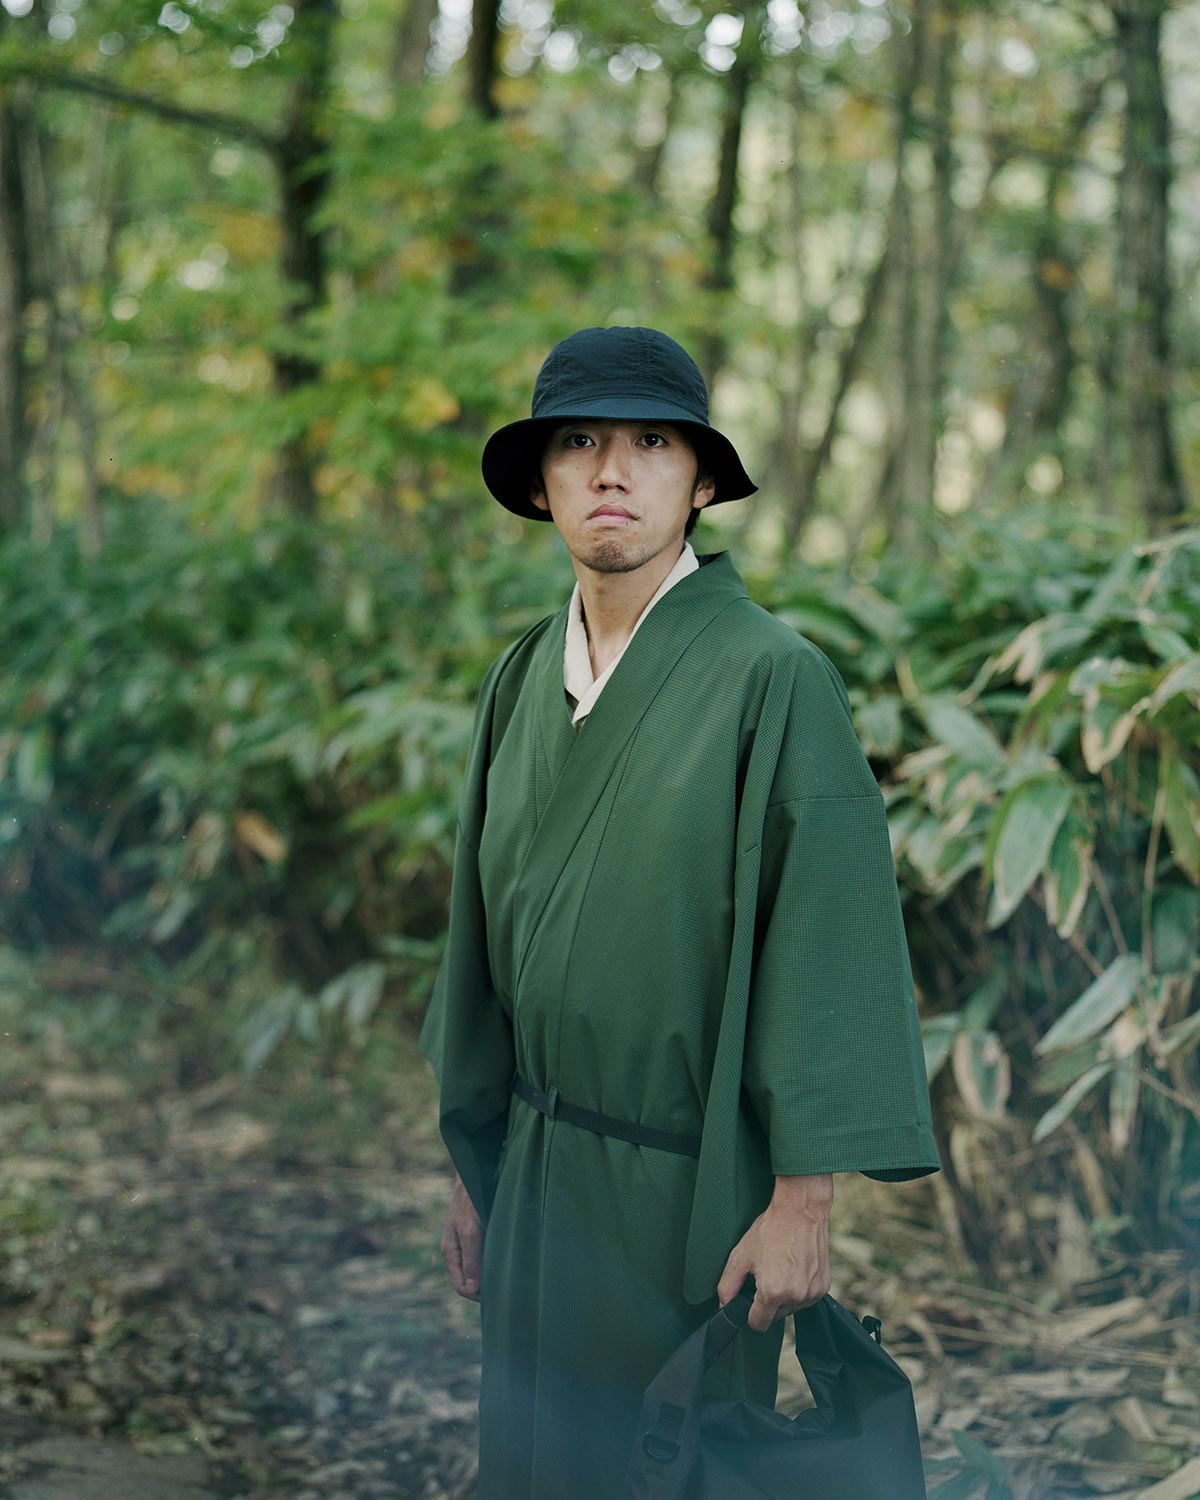 Camp like a samurai with the new Outdoor Kimono from Japanese